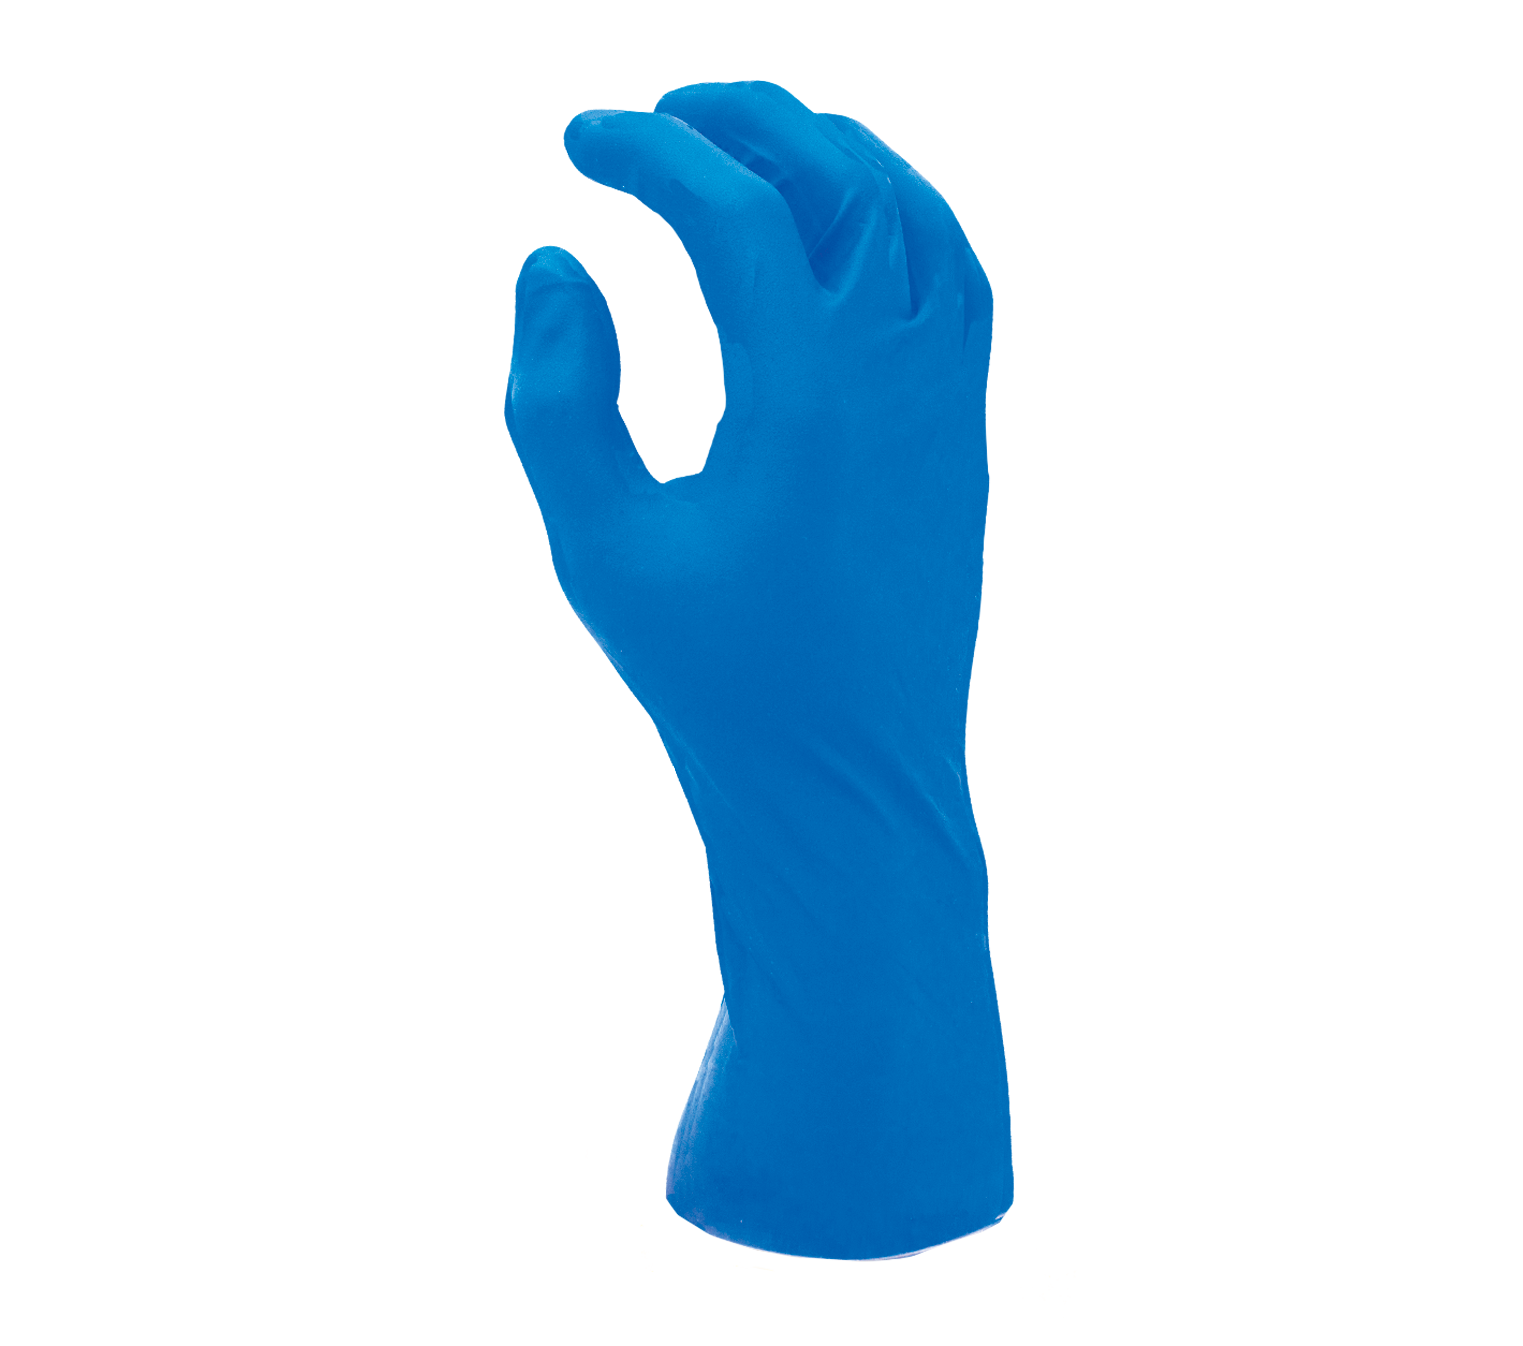 Ambidextrous, powder free industrial latex dark blue 14 mil gloves (not for medical use)